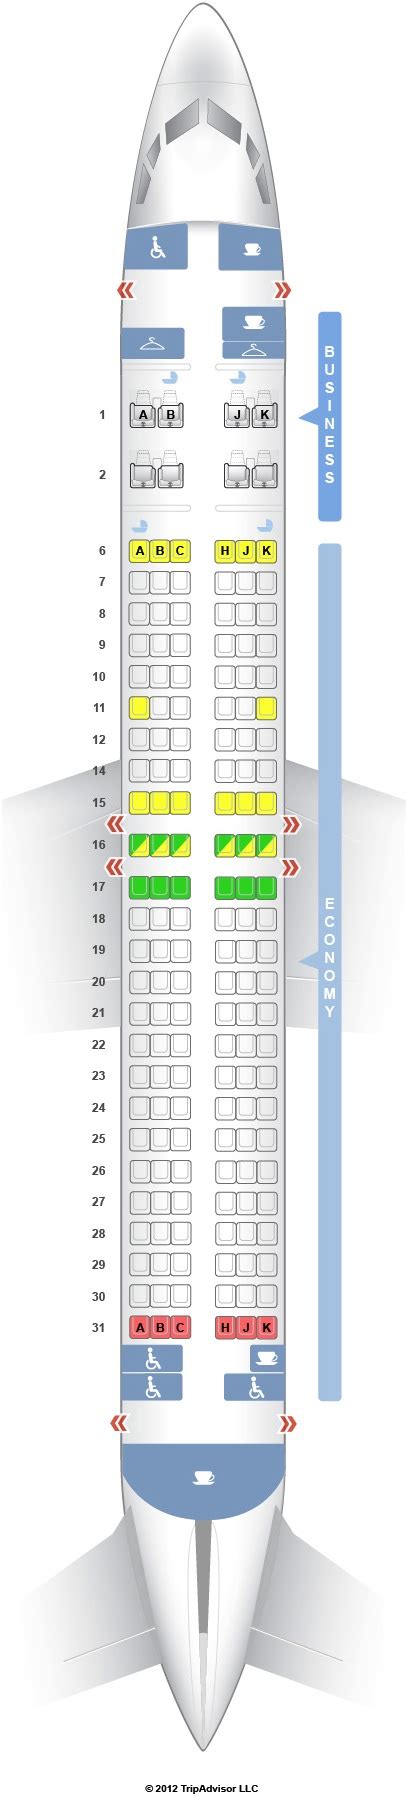 China Eastern Seat Selection China Eastern Business Class 777 6